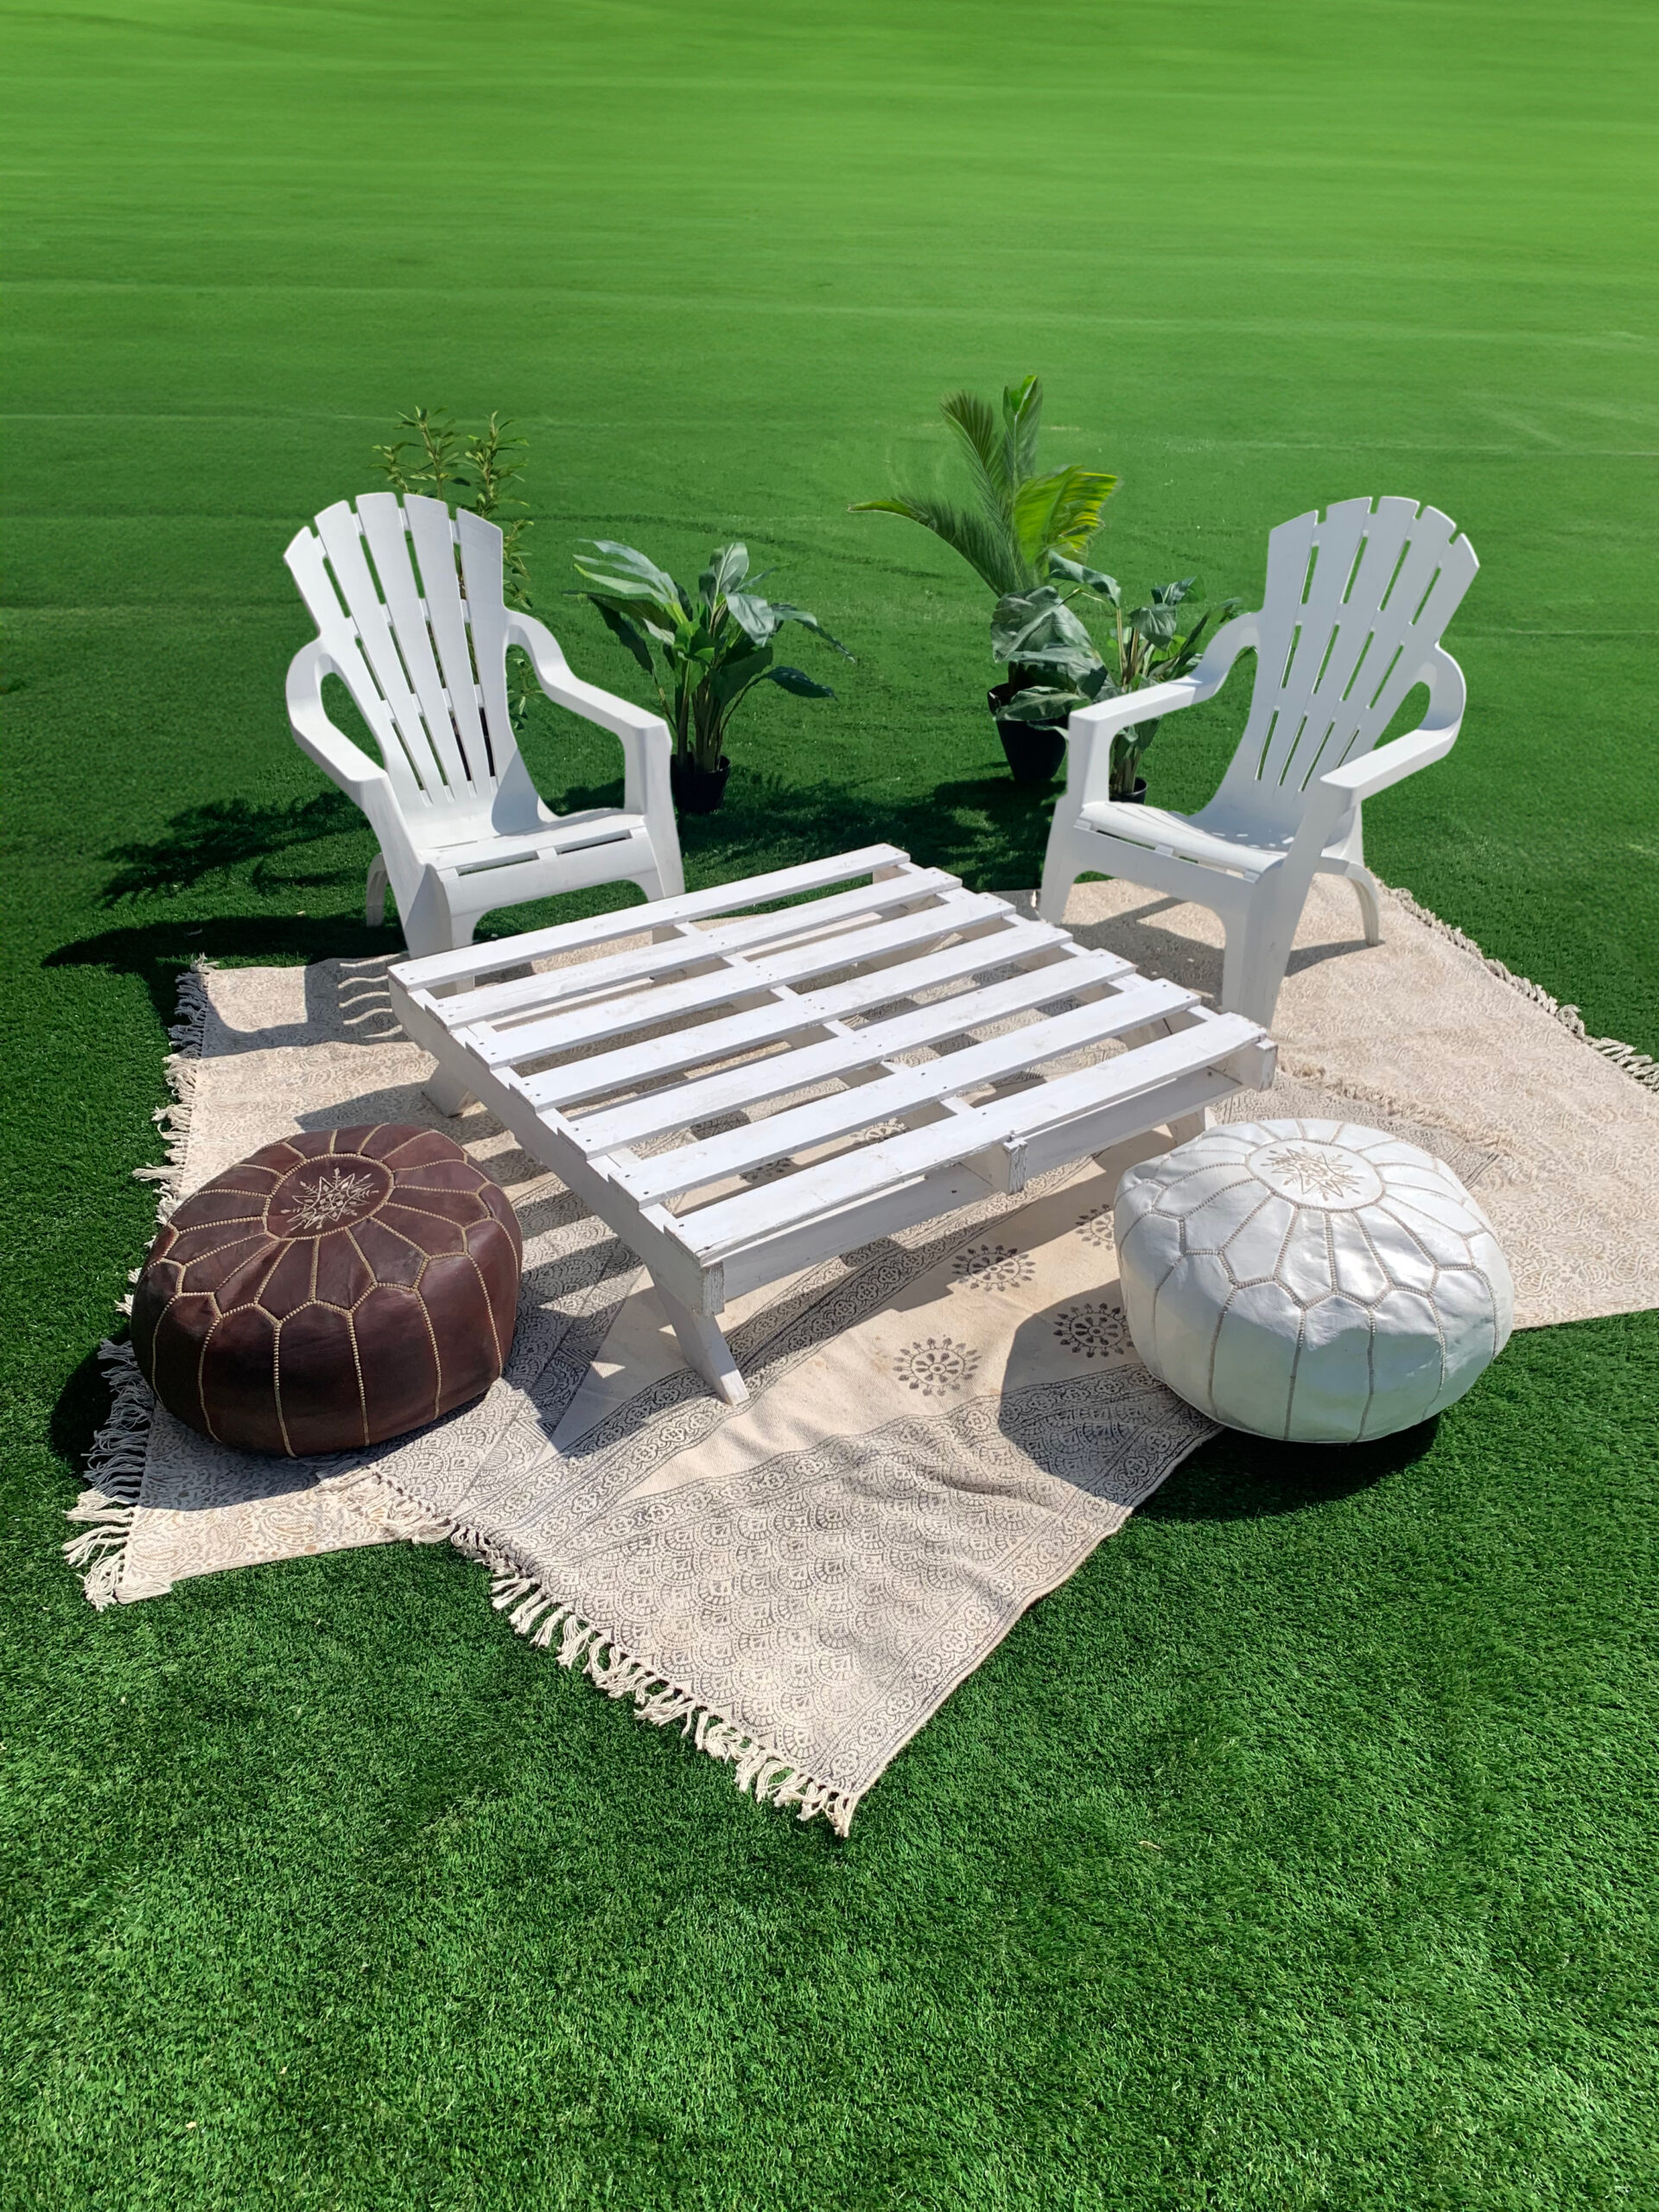 Pallet Picnic Table on grass styled with boho rugs, Moroccan ottomans and chairs for picnic setting